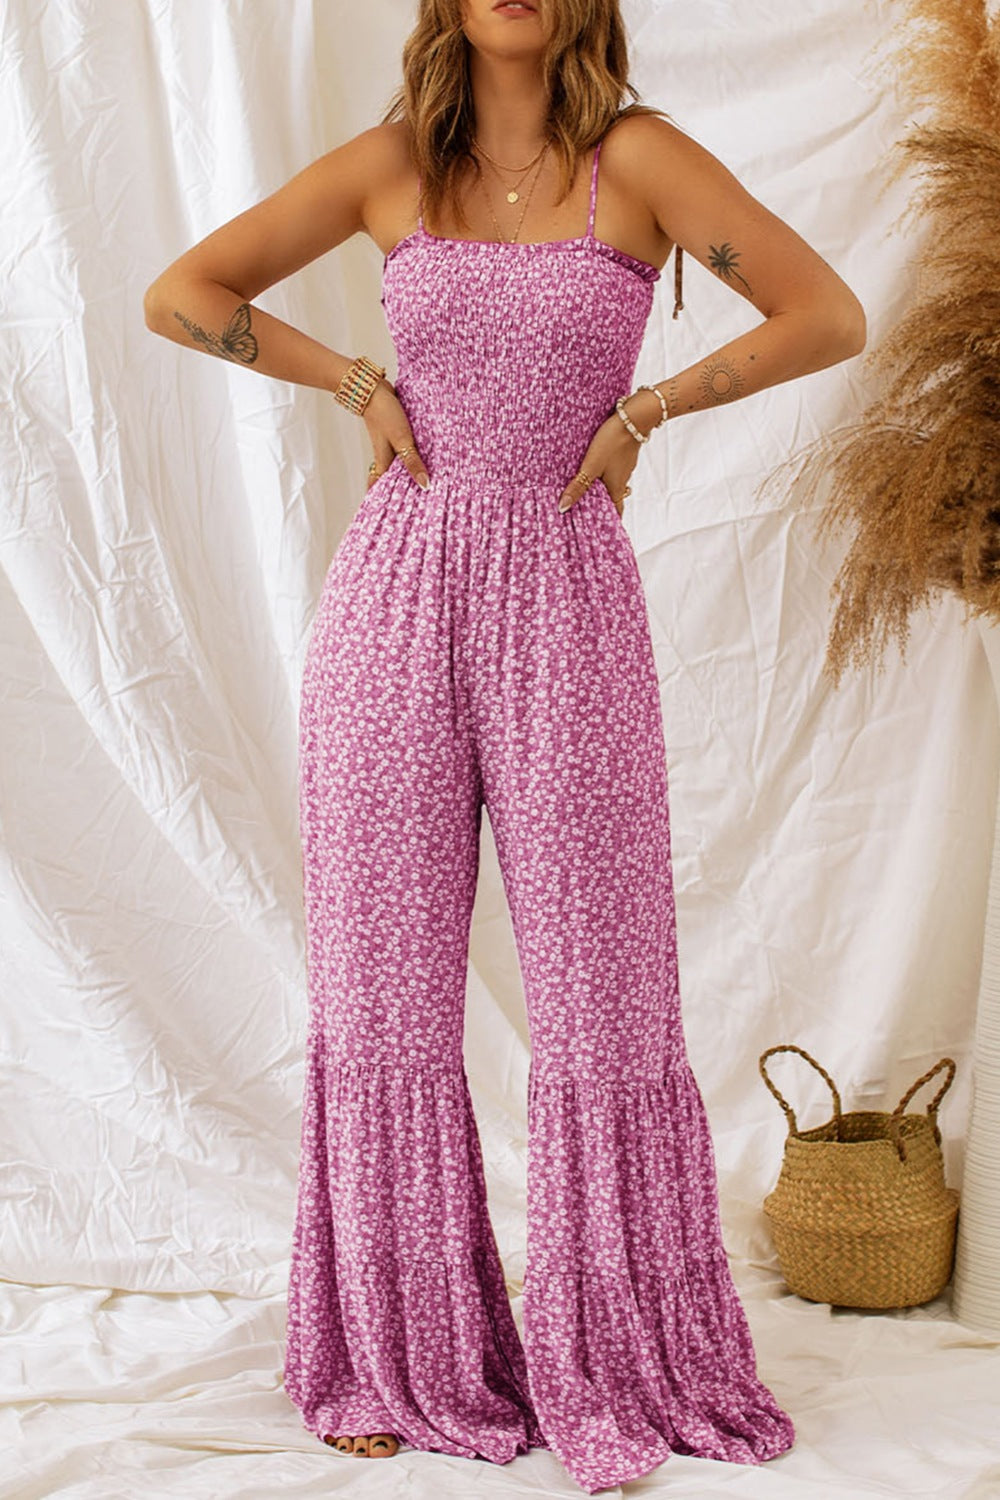 Retro Hippie Pant One-piece Smocked Tiered Wide Leg Bell Bottom Jumpsuit Floral